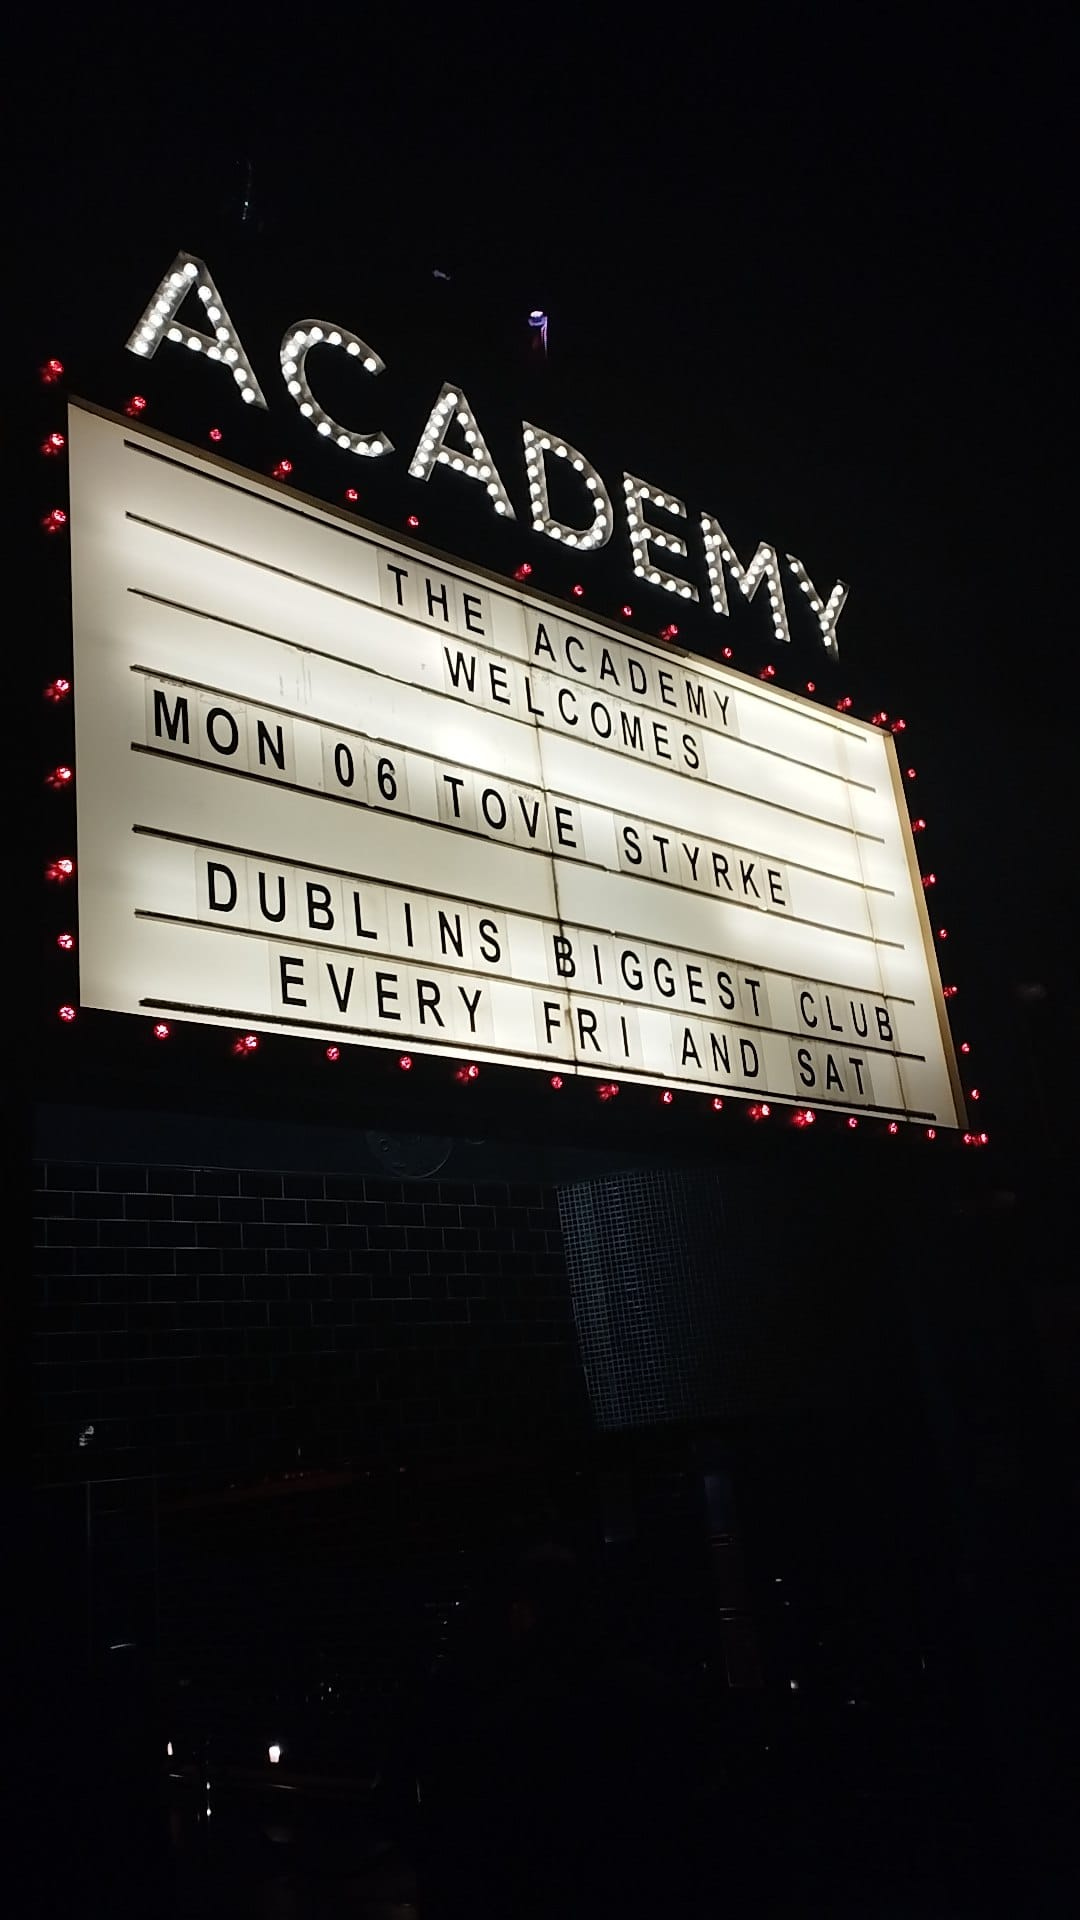 Billboard for the Academy. Text reads: The Academy welcomes Tove Styrke. Dublin's biggest club every Fri and Sat